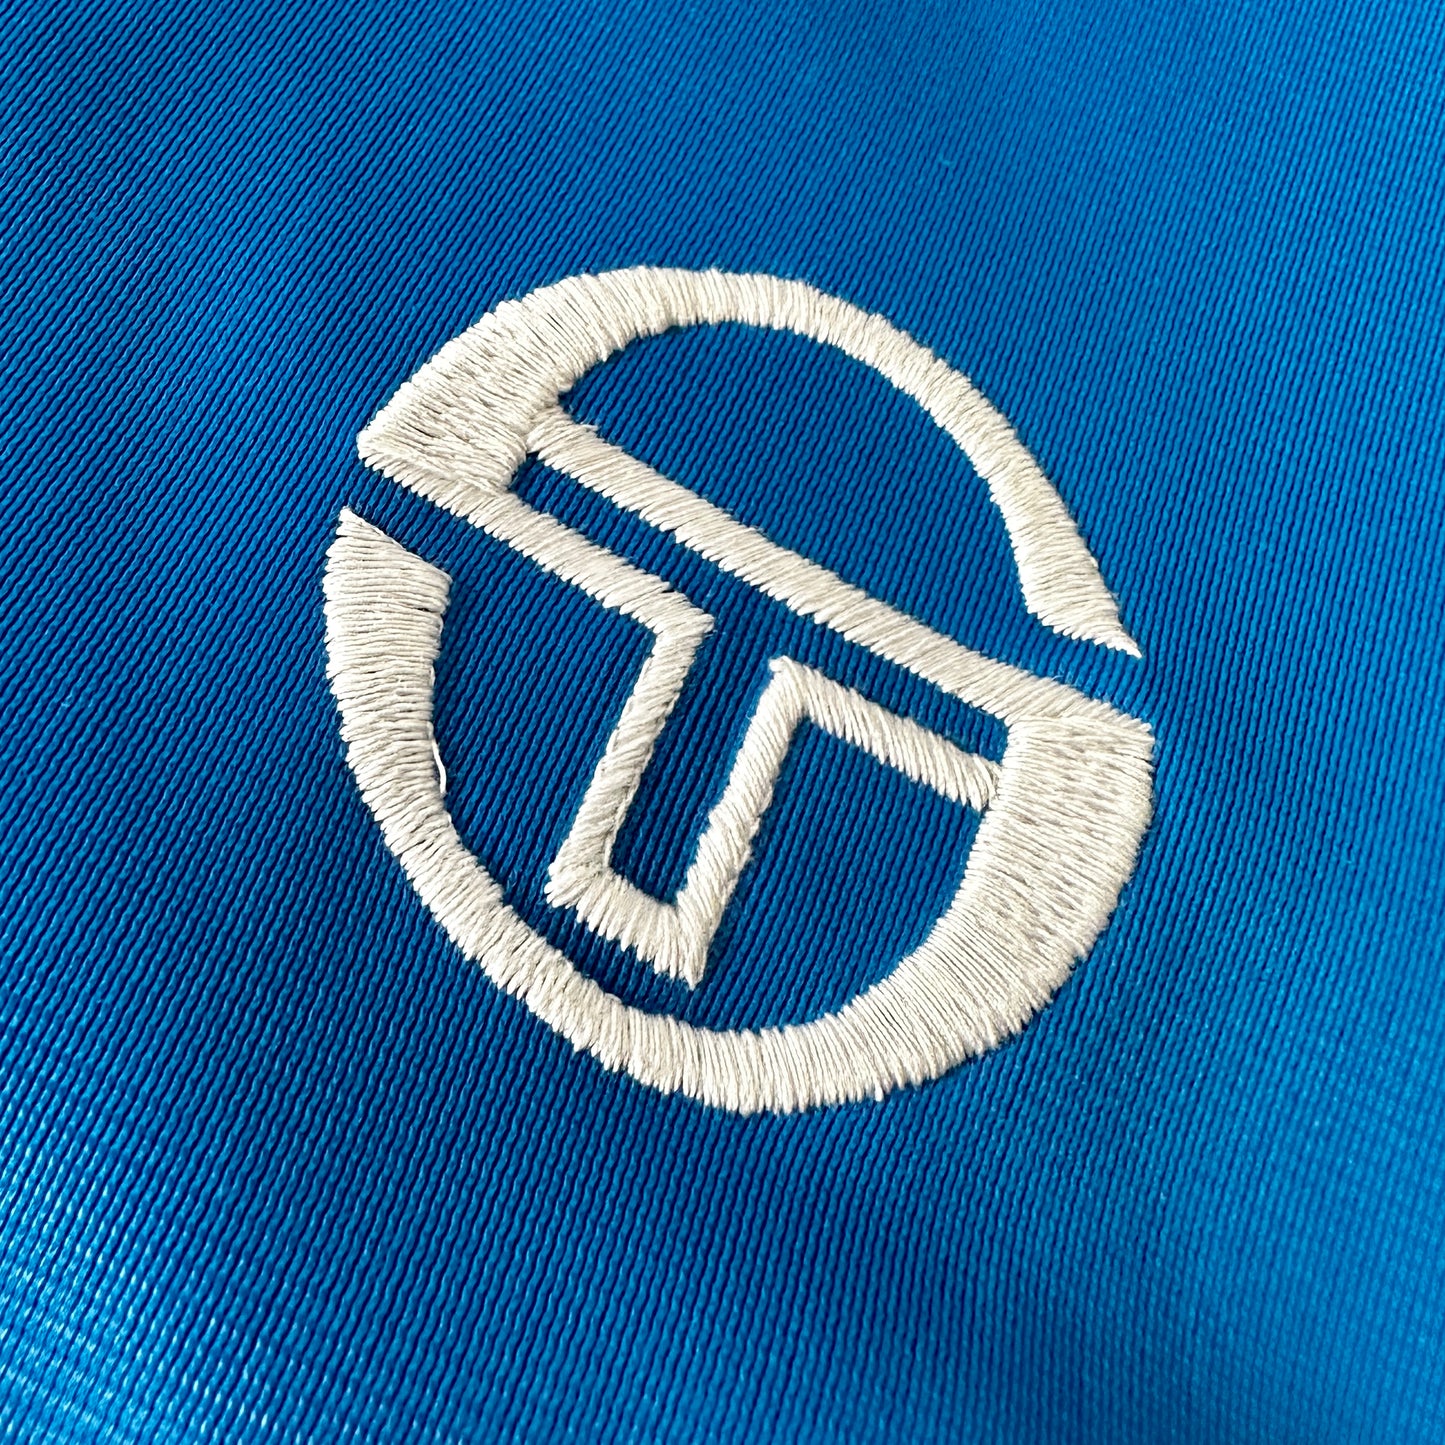 Sergio Tacchini Vintage 80s Track Jacket - 52 / L - Made in Italy